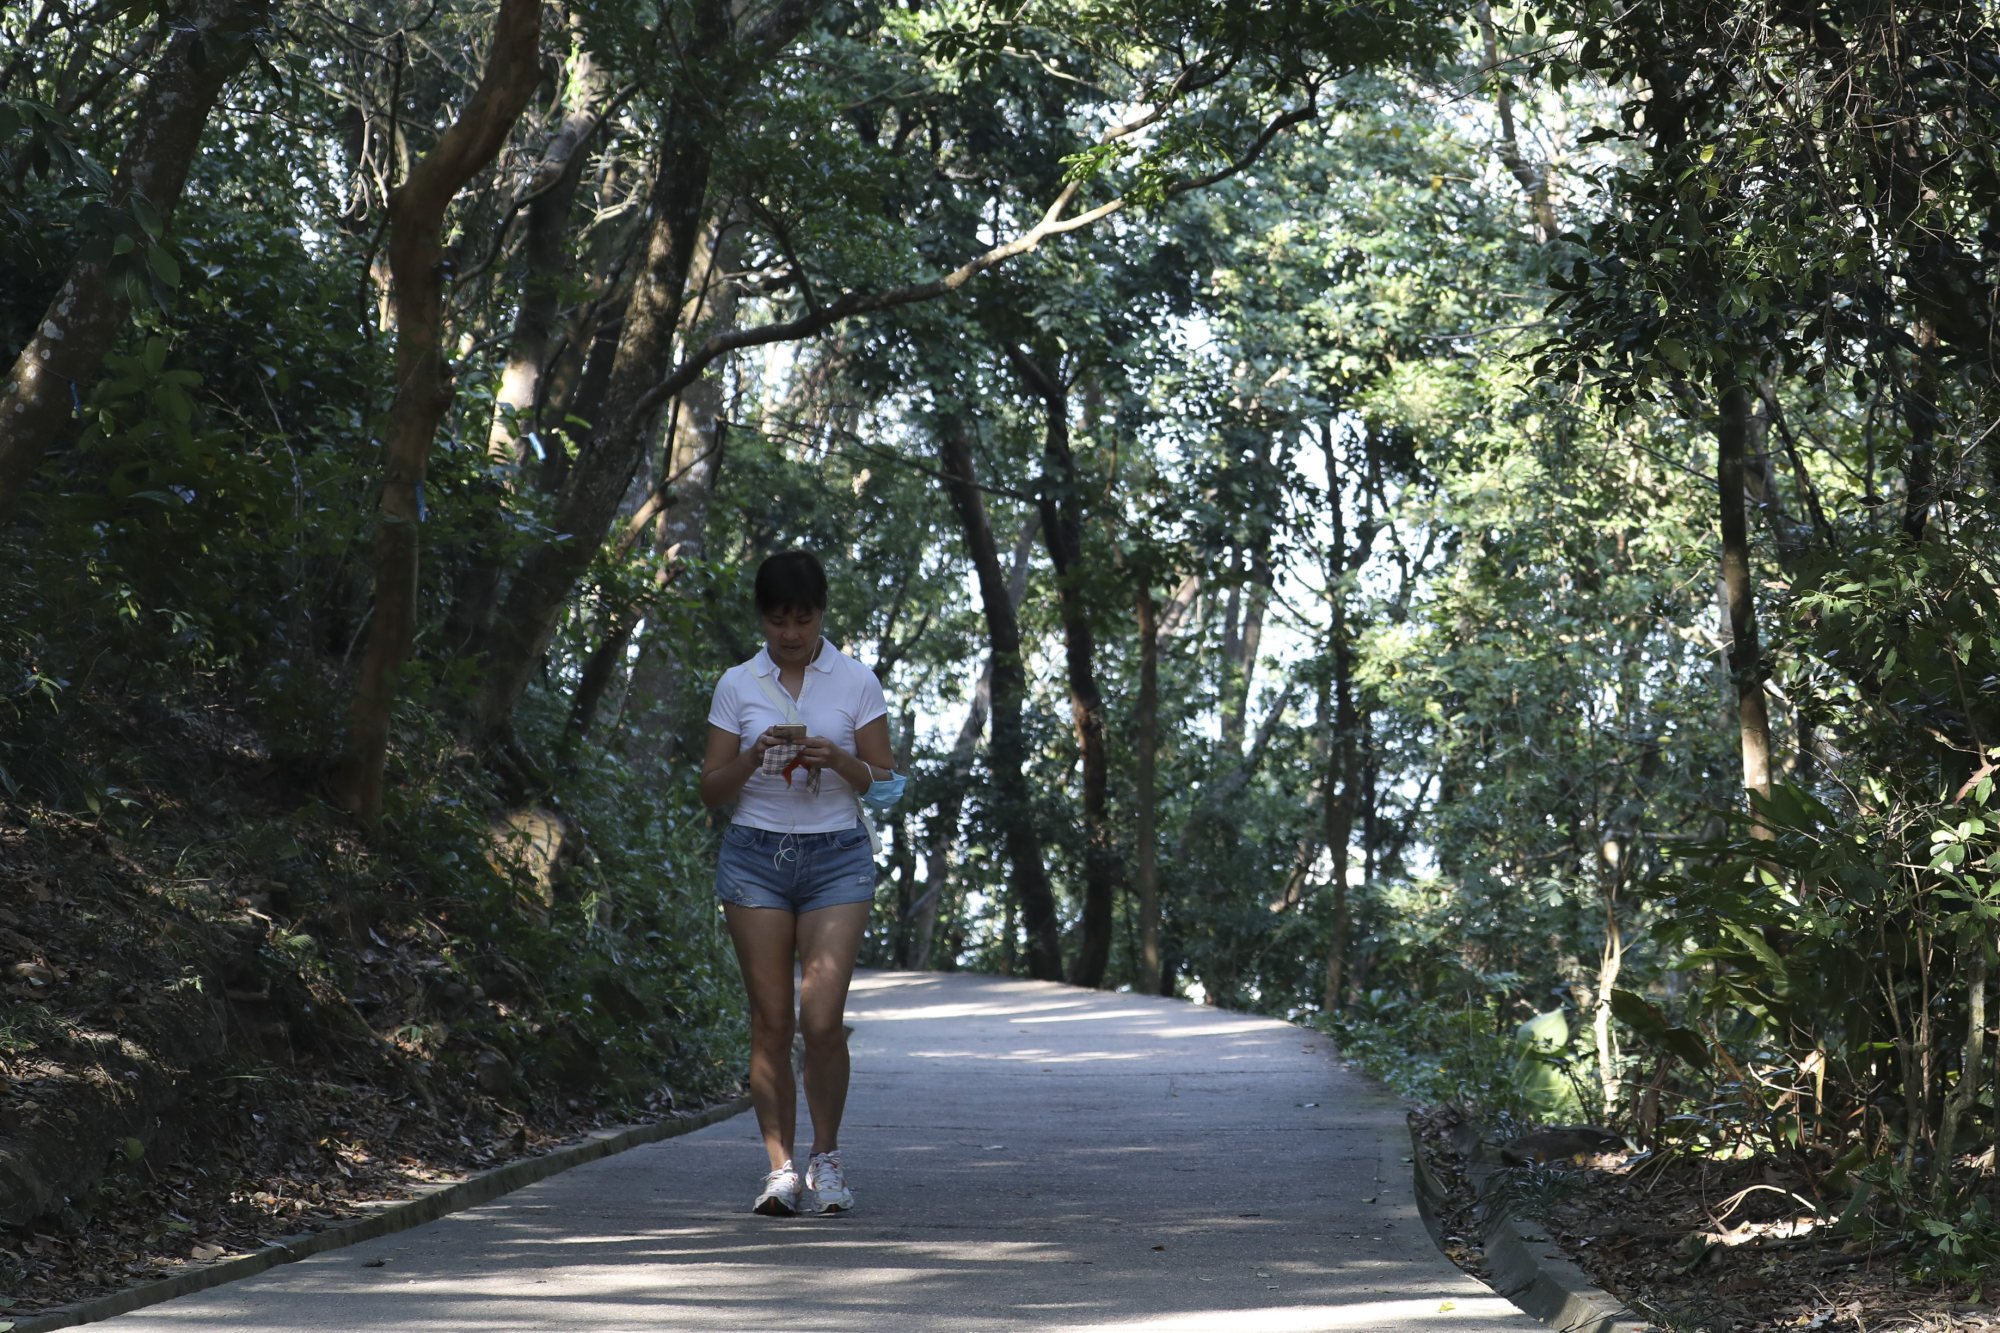 A hiker in Lung Fu Shan country park on Hong Kong Island. If you need a cardio workout, go for a walk, job, or bike ride outdoors. Photo: James Wendlinger